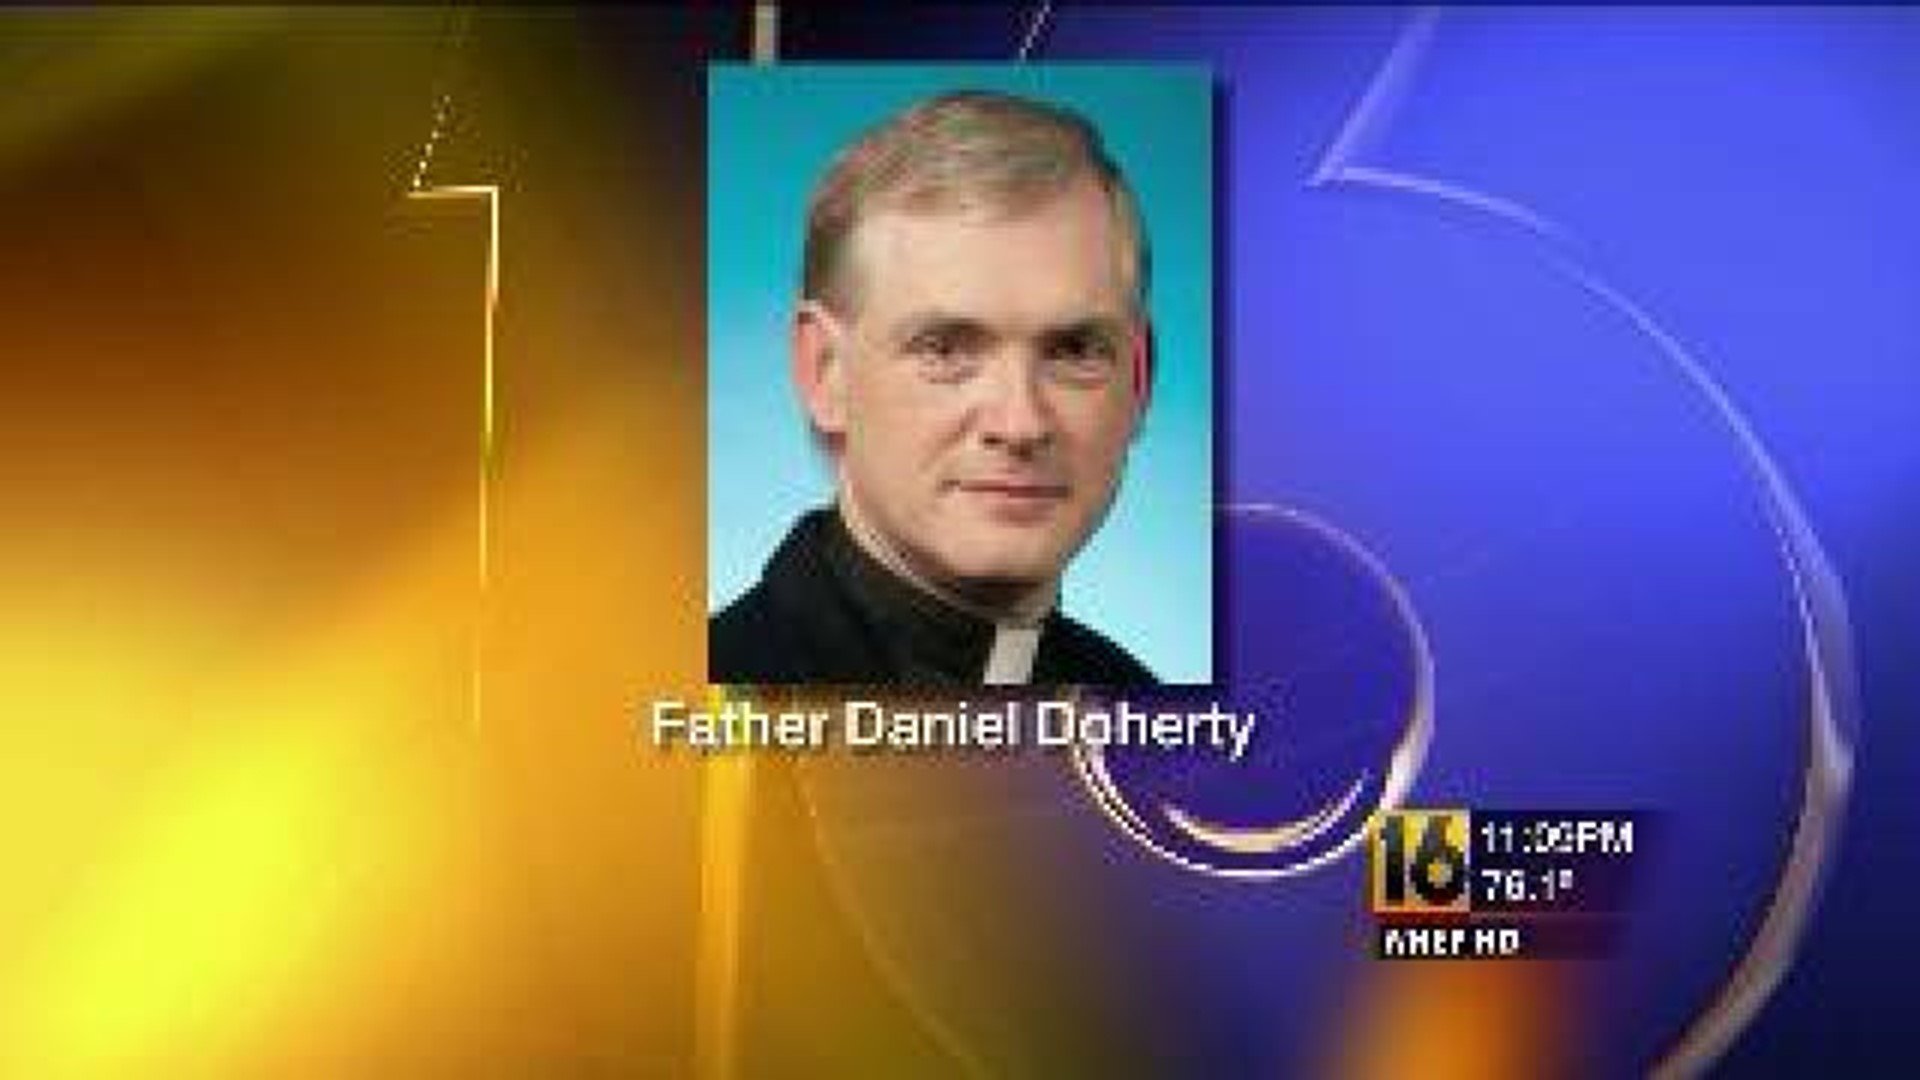 Lewdness charges dropped against priest